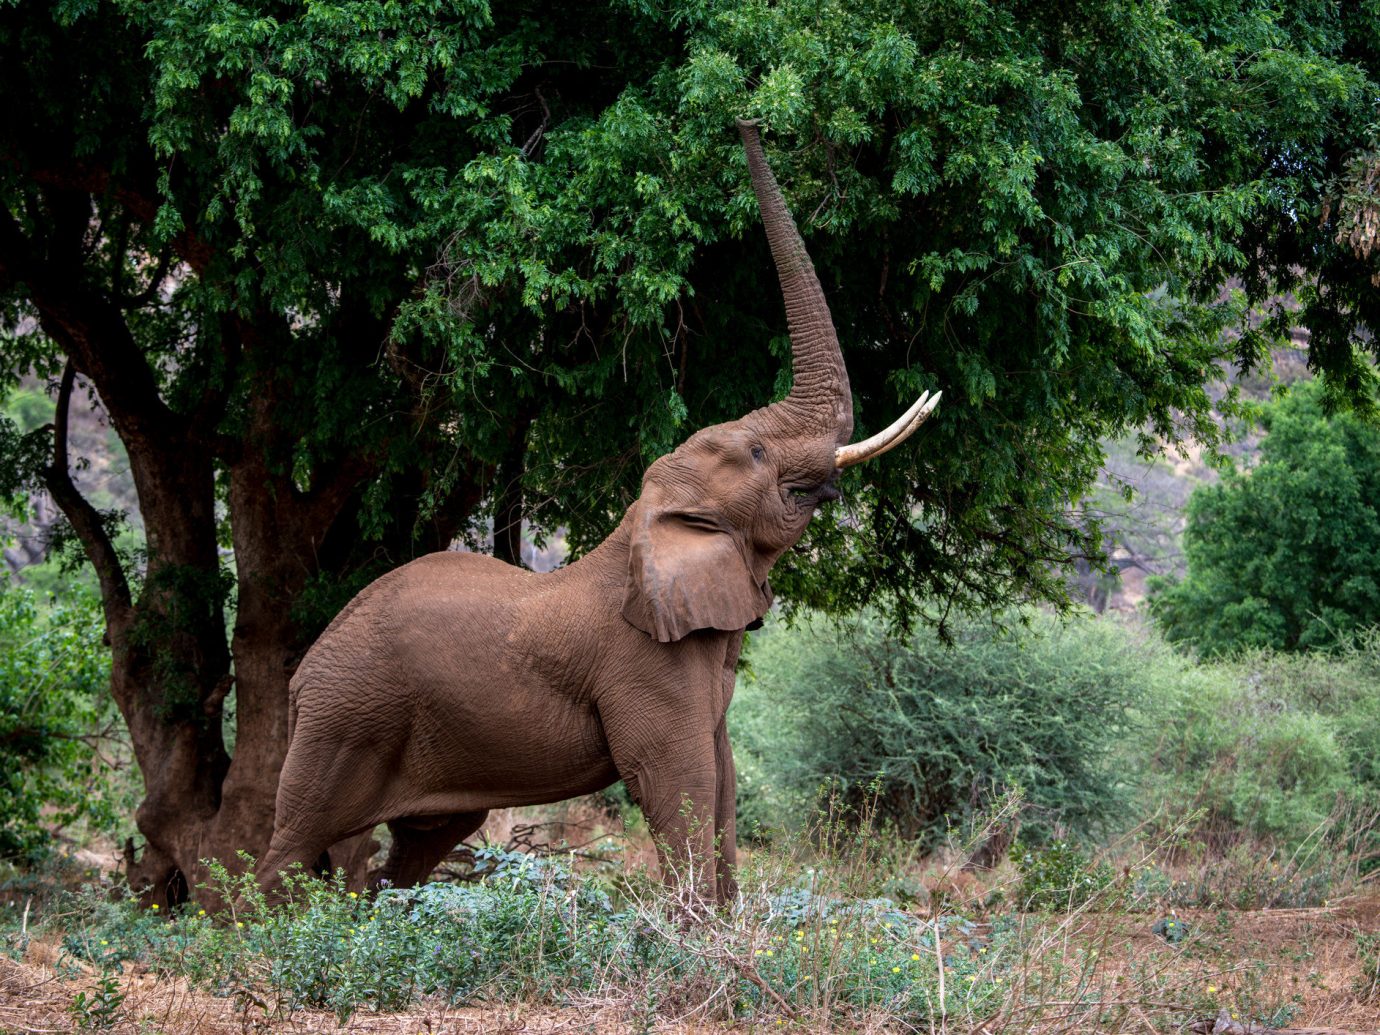 tree Trip Ideas outdoor elephant grass elephants and mammoths Wildlife terrestrial animal fauna indian elephant mammal wilderness nature reserve african elephant tusk national park Forest standing woodland Jungle organism plant green Safari bushes trunk wooded lush